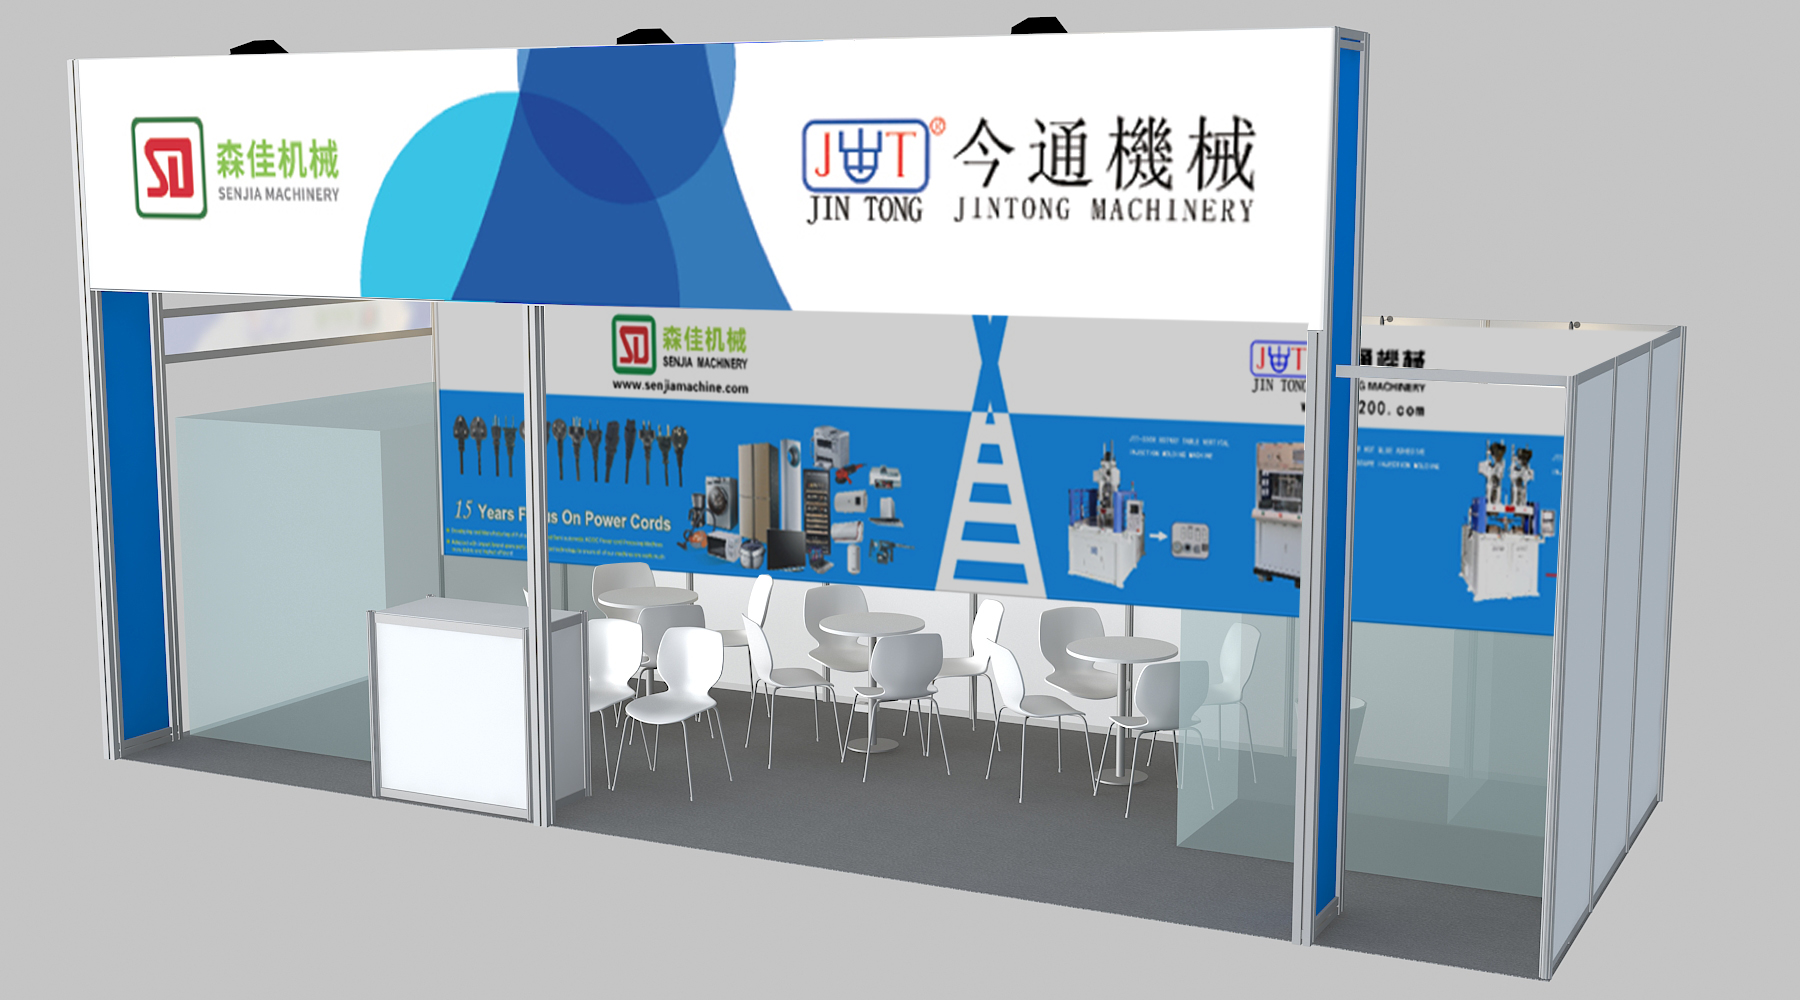 JINTONG attend 2019 Thailand Wire & Tube Fair